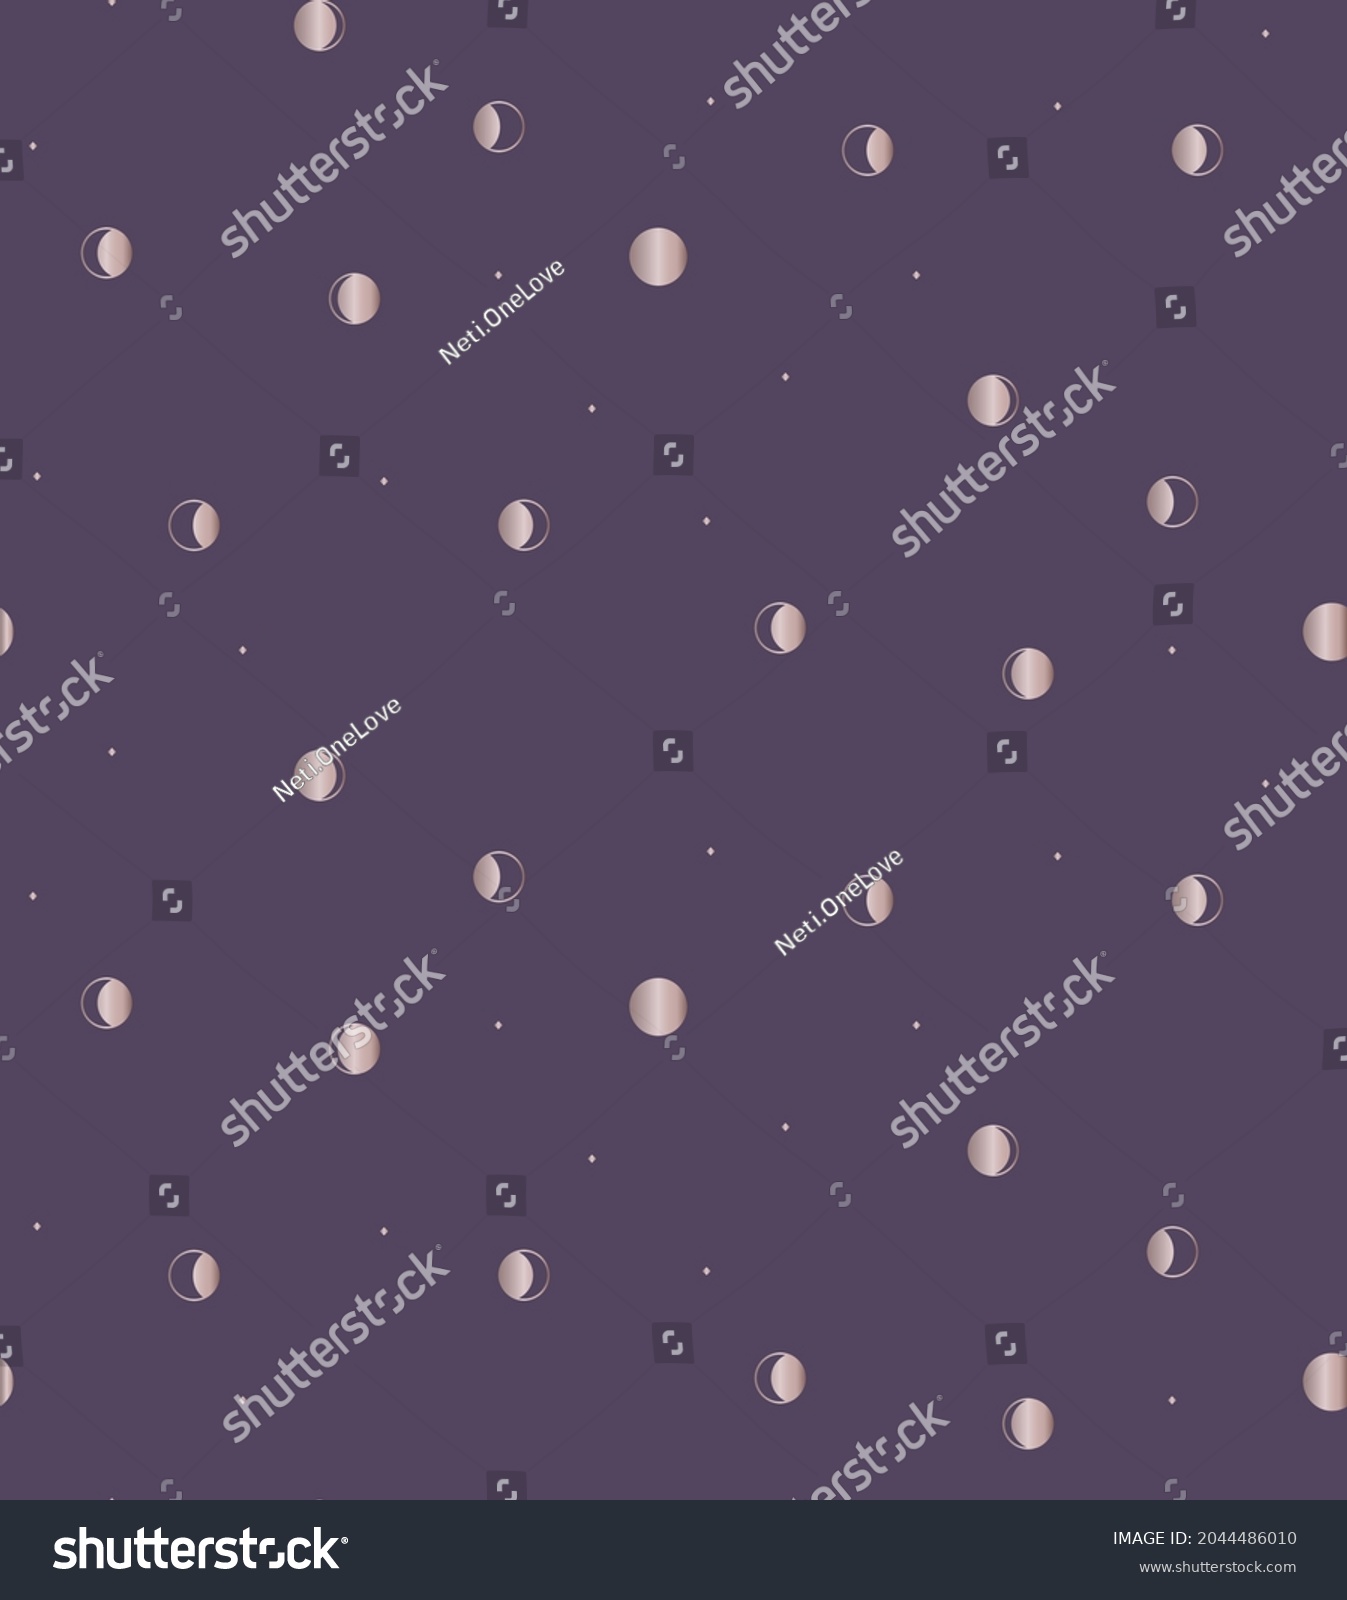 SVG of Abstract Background Seamless Pattern with Crescents, Stars, moon phases. Mystic Design, Vector Illustration for wrapping tissue paper. Pink Gold svg